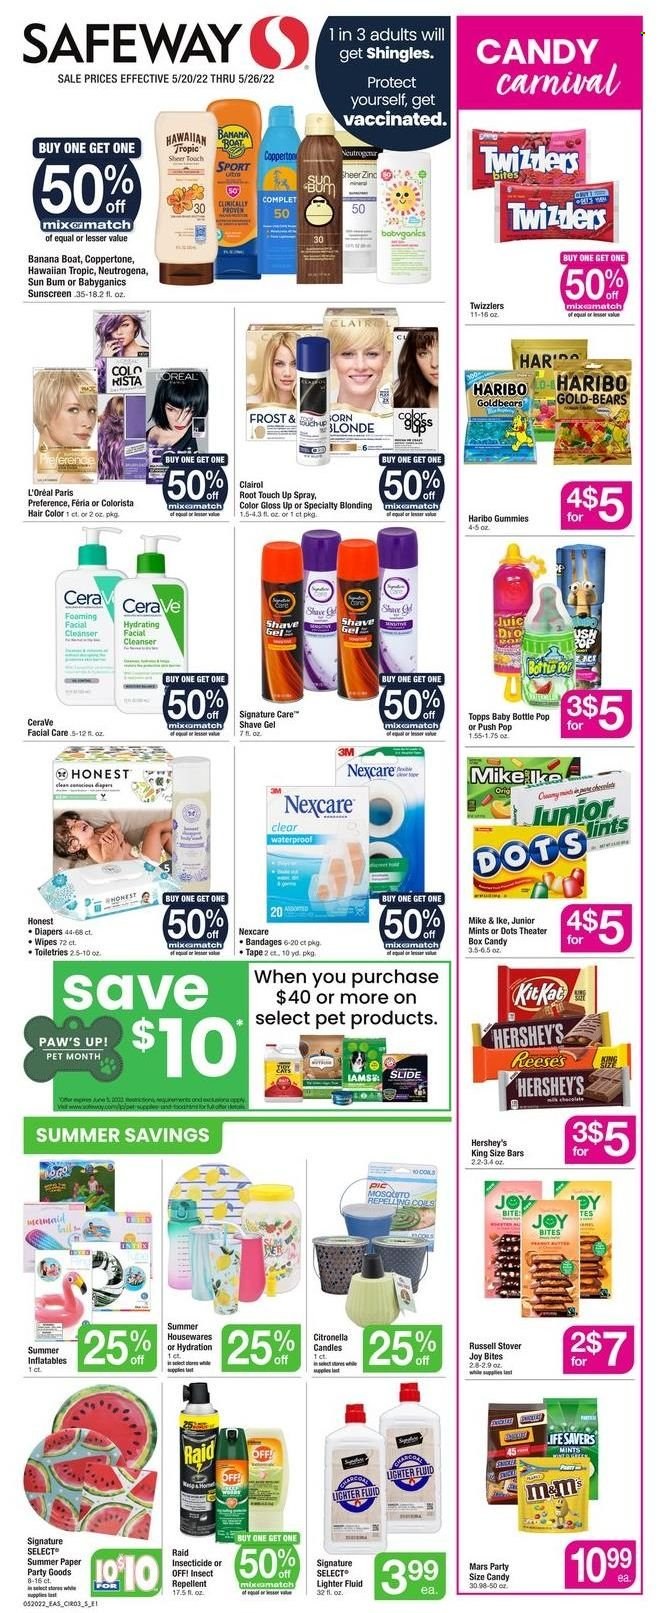 thumbnail - Safeway Flyer - 05/20/2022 - 05/26/2022 - Sales products - Reese's, Hershey's, Haribo, Mars, wipes, Joy, CeraVe, cleanser, L’Oréal, Neutrogena, Clairol, hair color, shave gel, paper, candle, Iams, boat, zinc. Page 6.